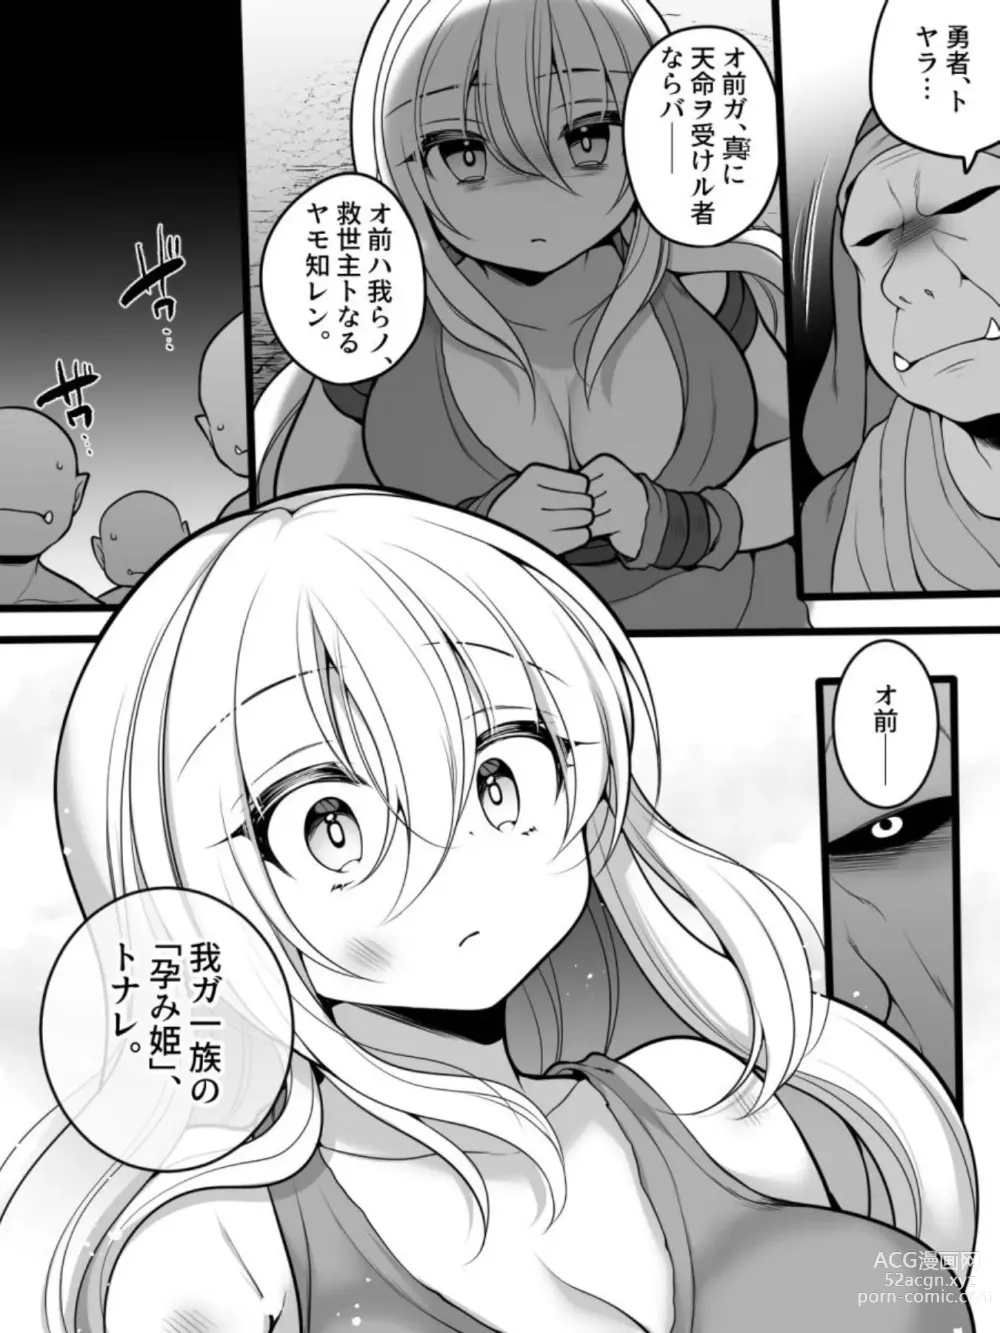 Page 10 of doujinshi TS Impregnated Princess ~A story about a former hero who becomes the princess of a group of orcs~